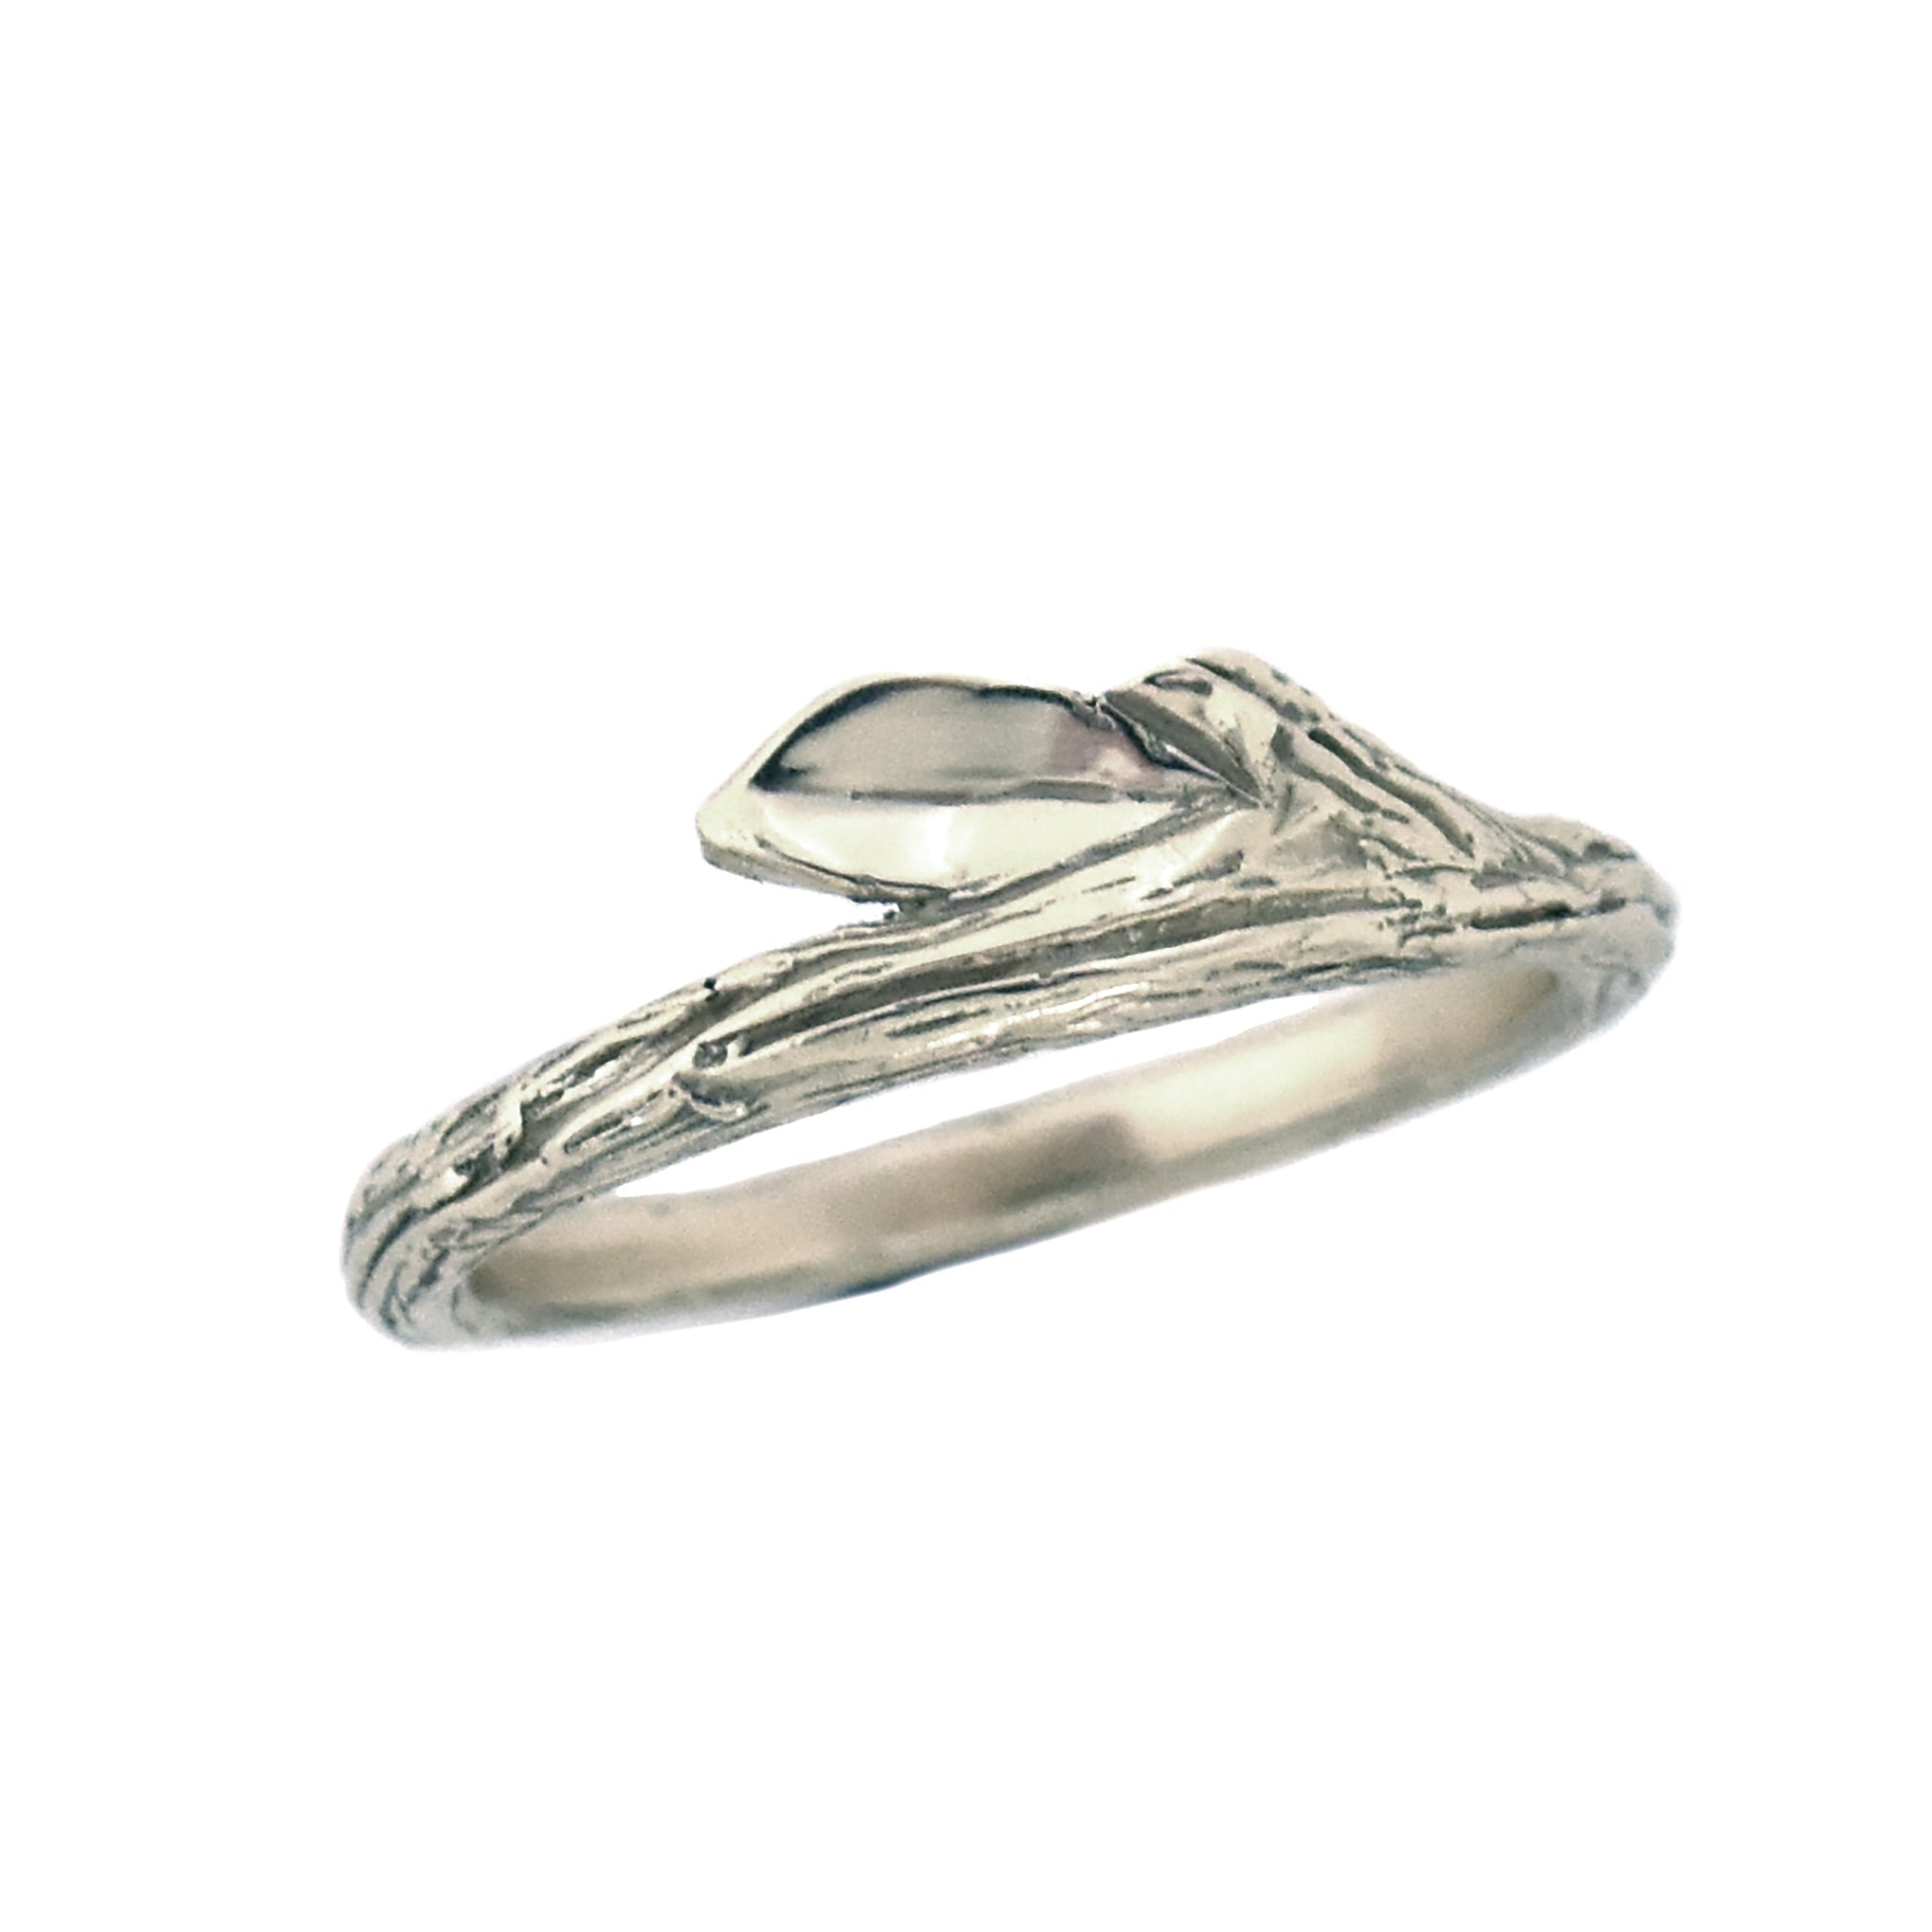 Gold Summer Twig Ring - your choice of gold - Wedding Ring 18K Palladium White Gold 14K Yellow Gold 3905 - handmade by Beth Millner Jewelry